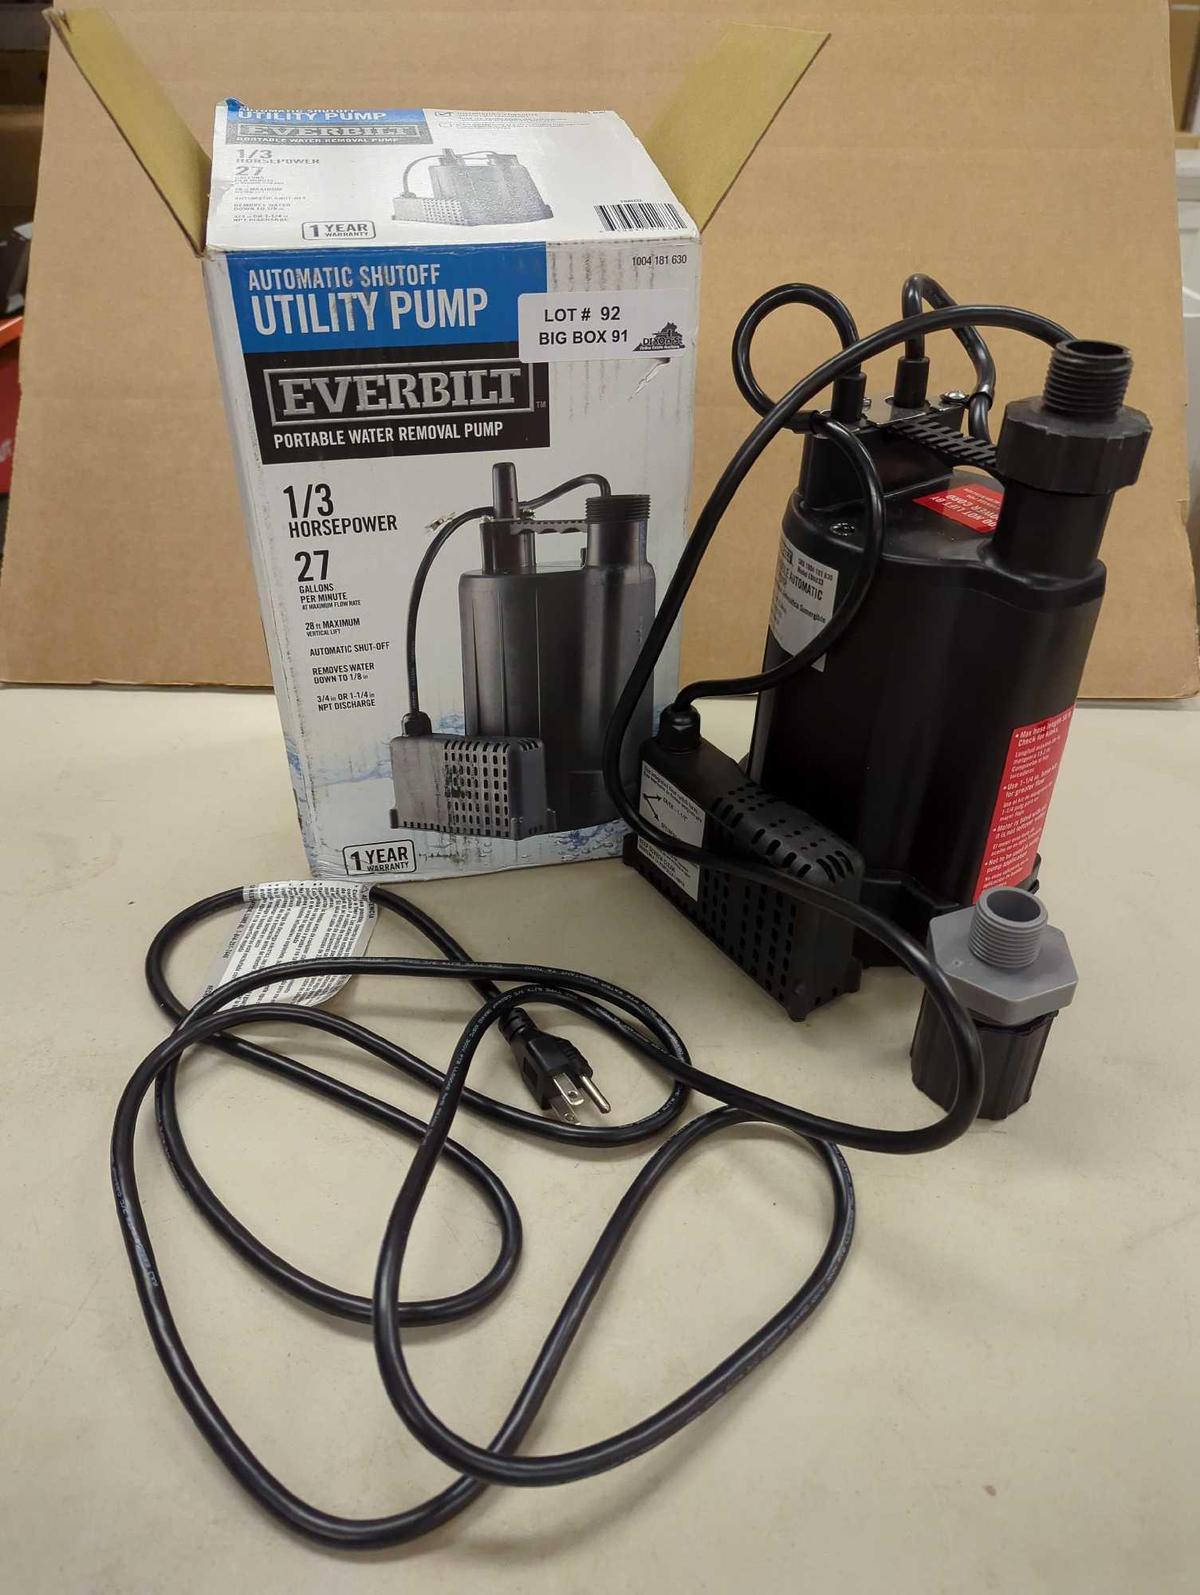 Everbilt 1/3 HP Automatic Utility Pump. Comes in open box as is shonen photos. Appears to be new.